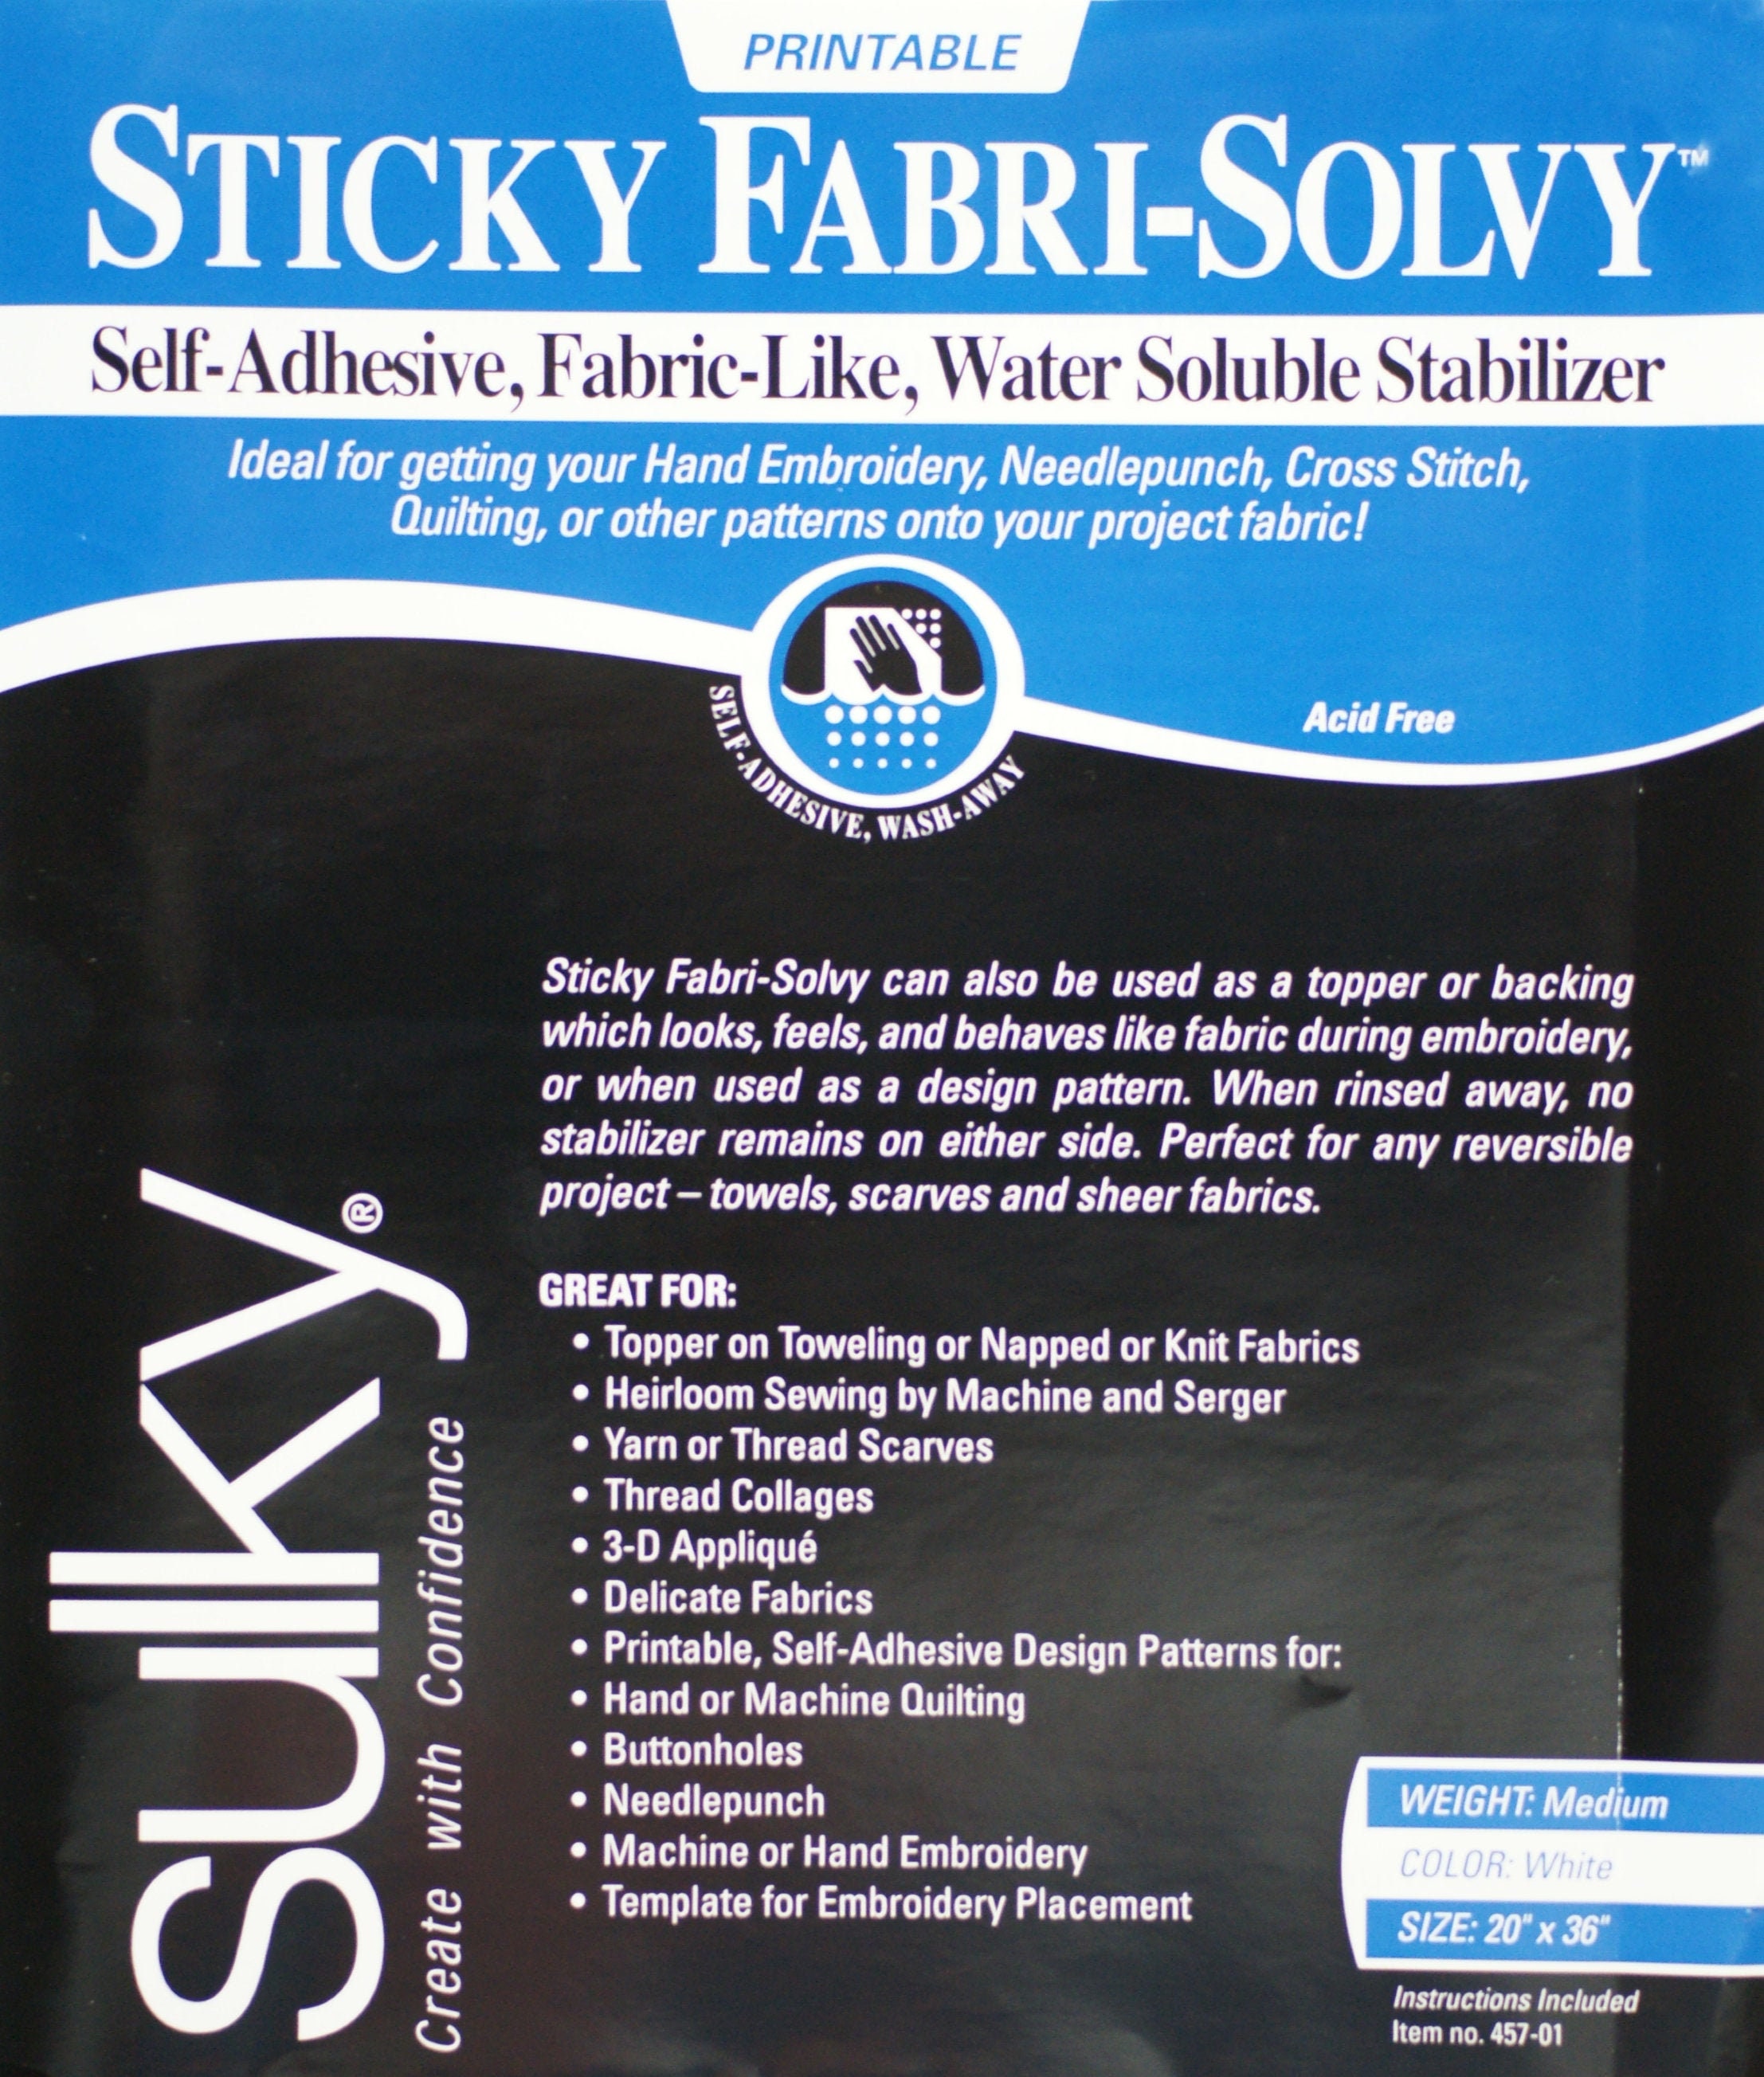 Sulky Sticky Fabri-solvy, 20x36, Printable, Water Soluble Stabilizer,  Dissolvable Fabric, 457-01 